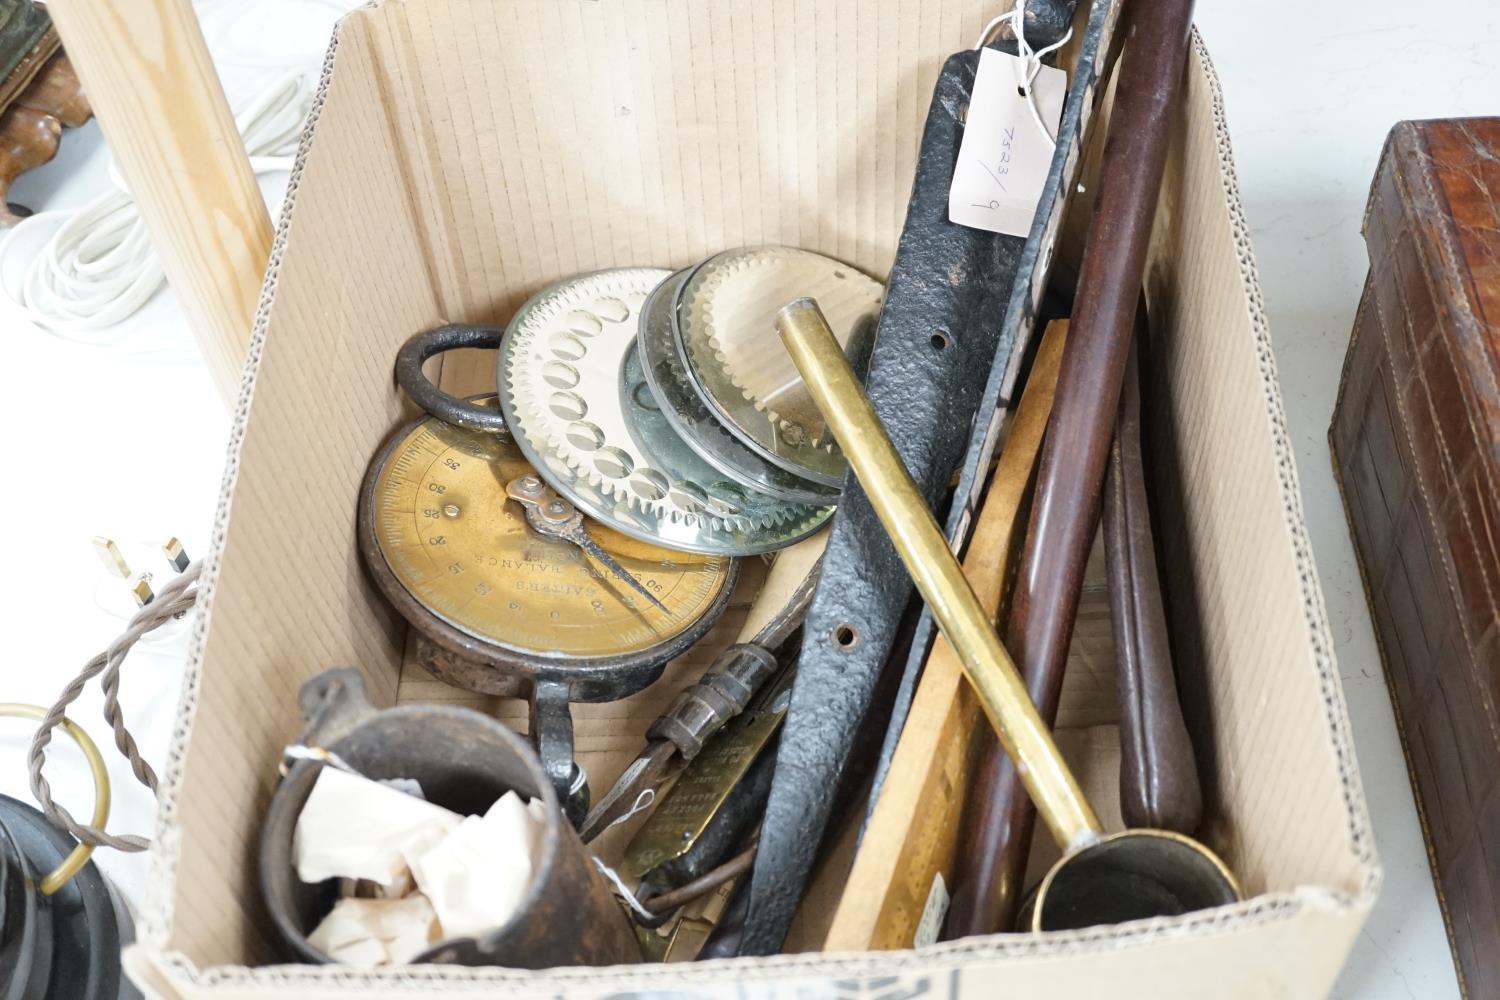 A quantity of collectables including handbags, scales, metal wares etc - Image 2 of 5